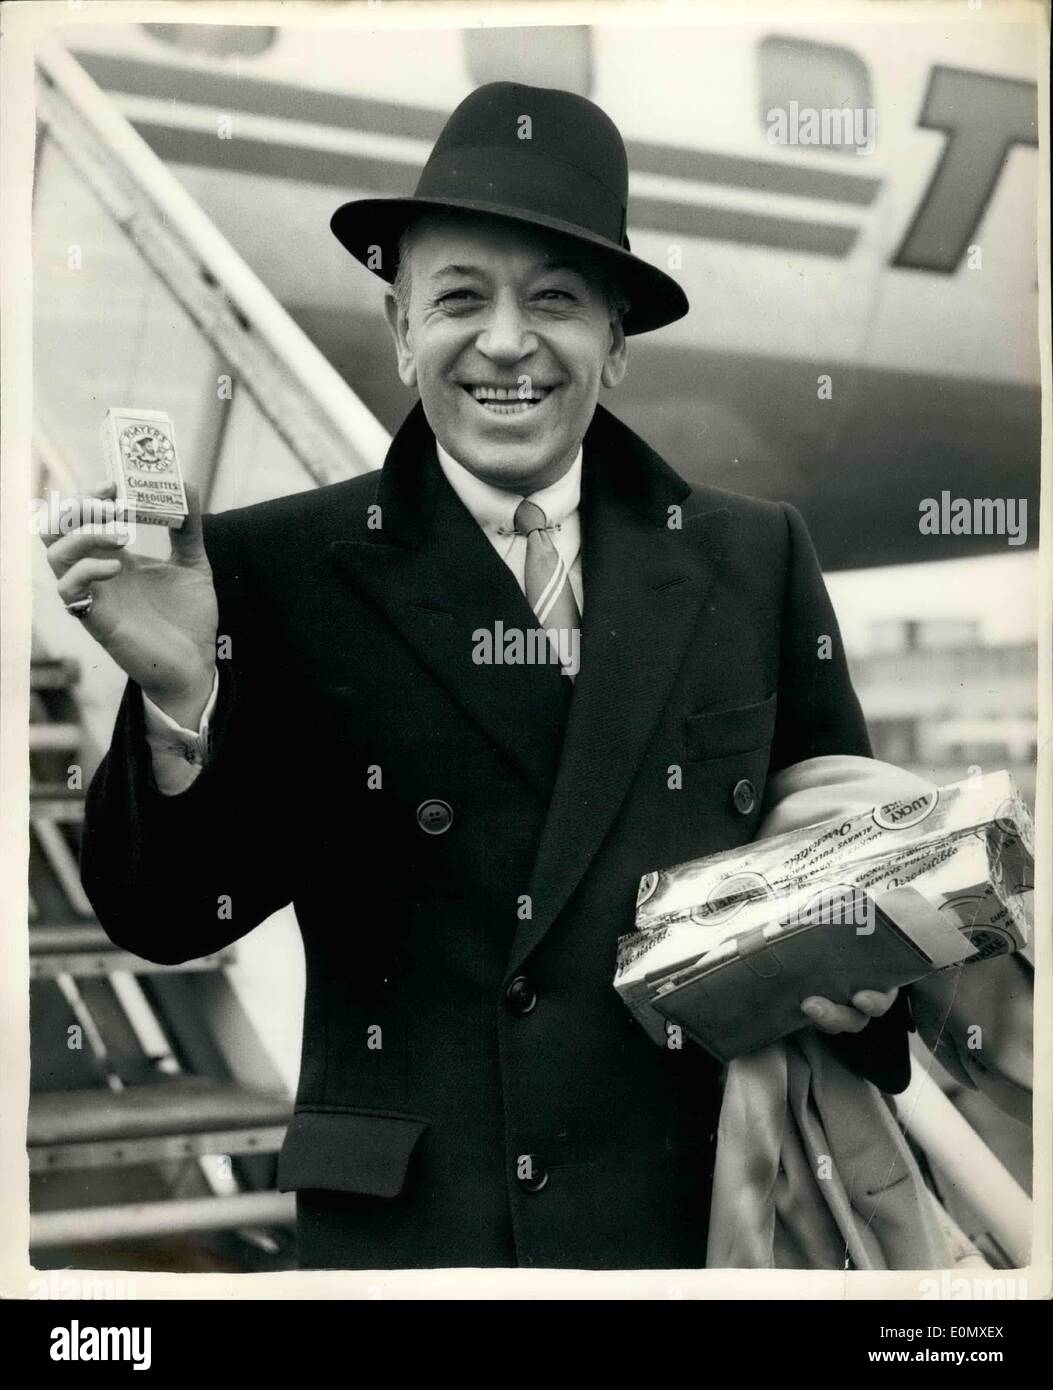 Feb. 02, 1957 - George Raft Arrives In London: George Raft the American star - who made his name for his gangster roles in films - arrived at London Airport this morning. He is to appear in ''Morning Call'' - a film to be made in this country. Photo shows George Raft - on his arrival at London Airport this morning. Stock Photo